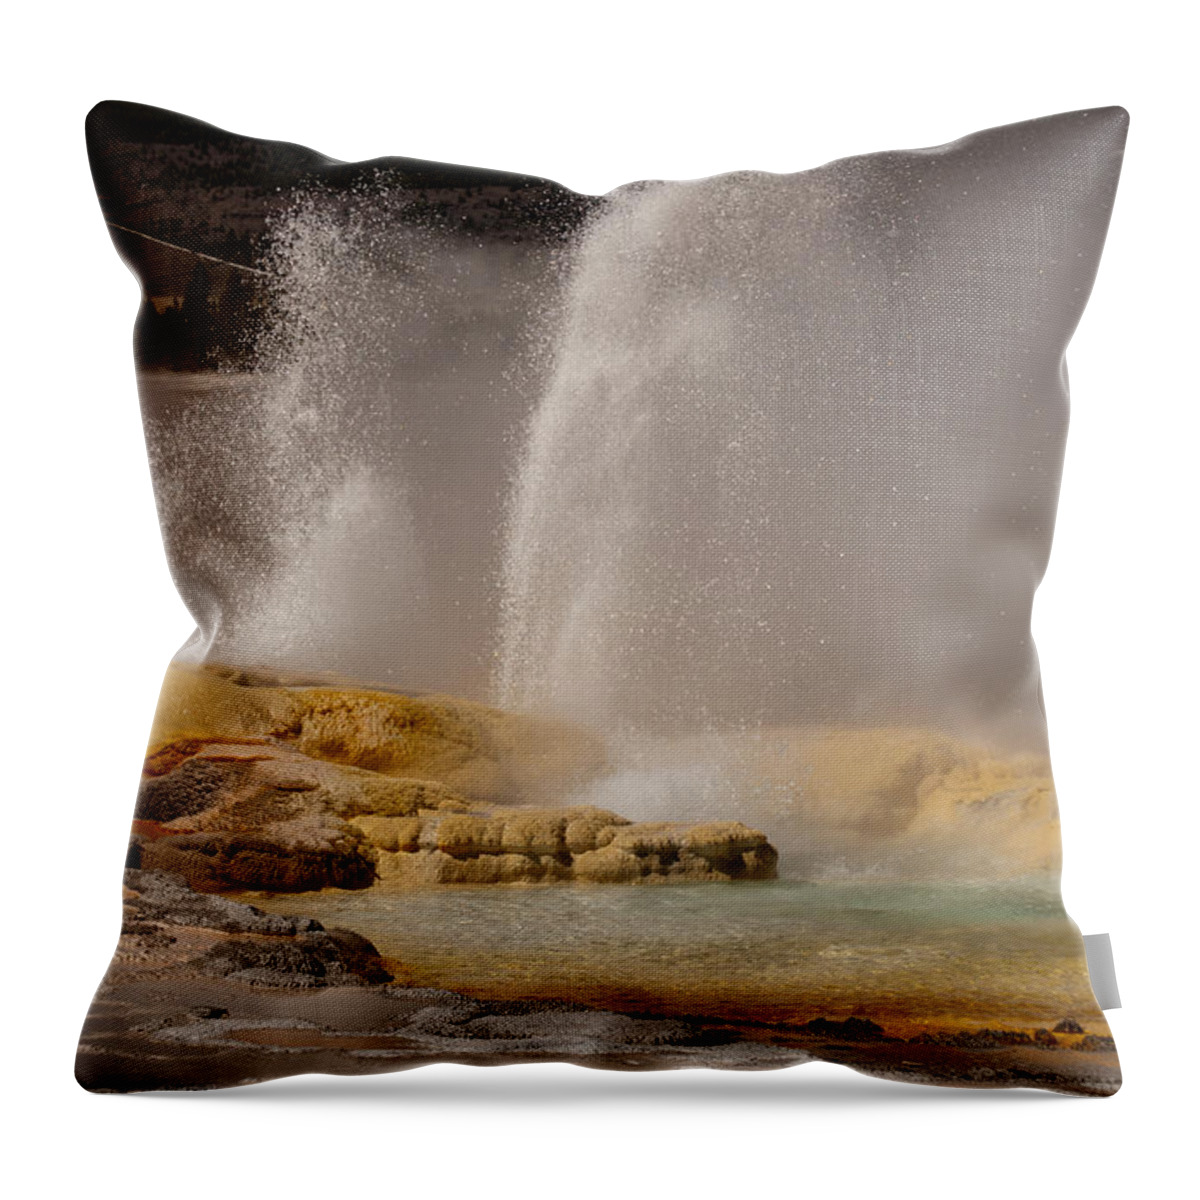 Geyser Throw Pillow featuring the photograph Clepsydra Geyser Yellowstone National Park by Bruce Gourley